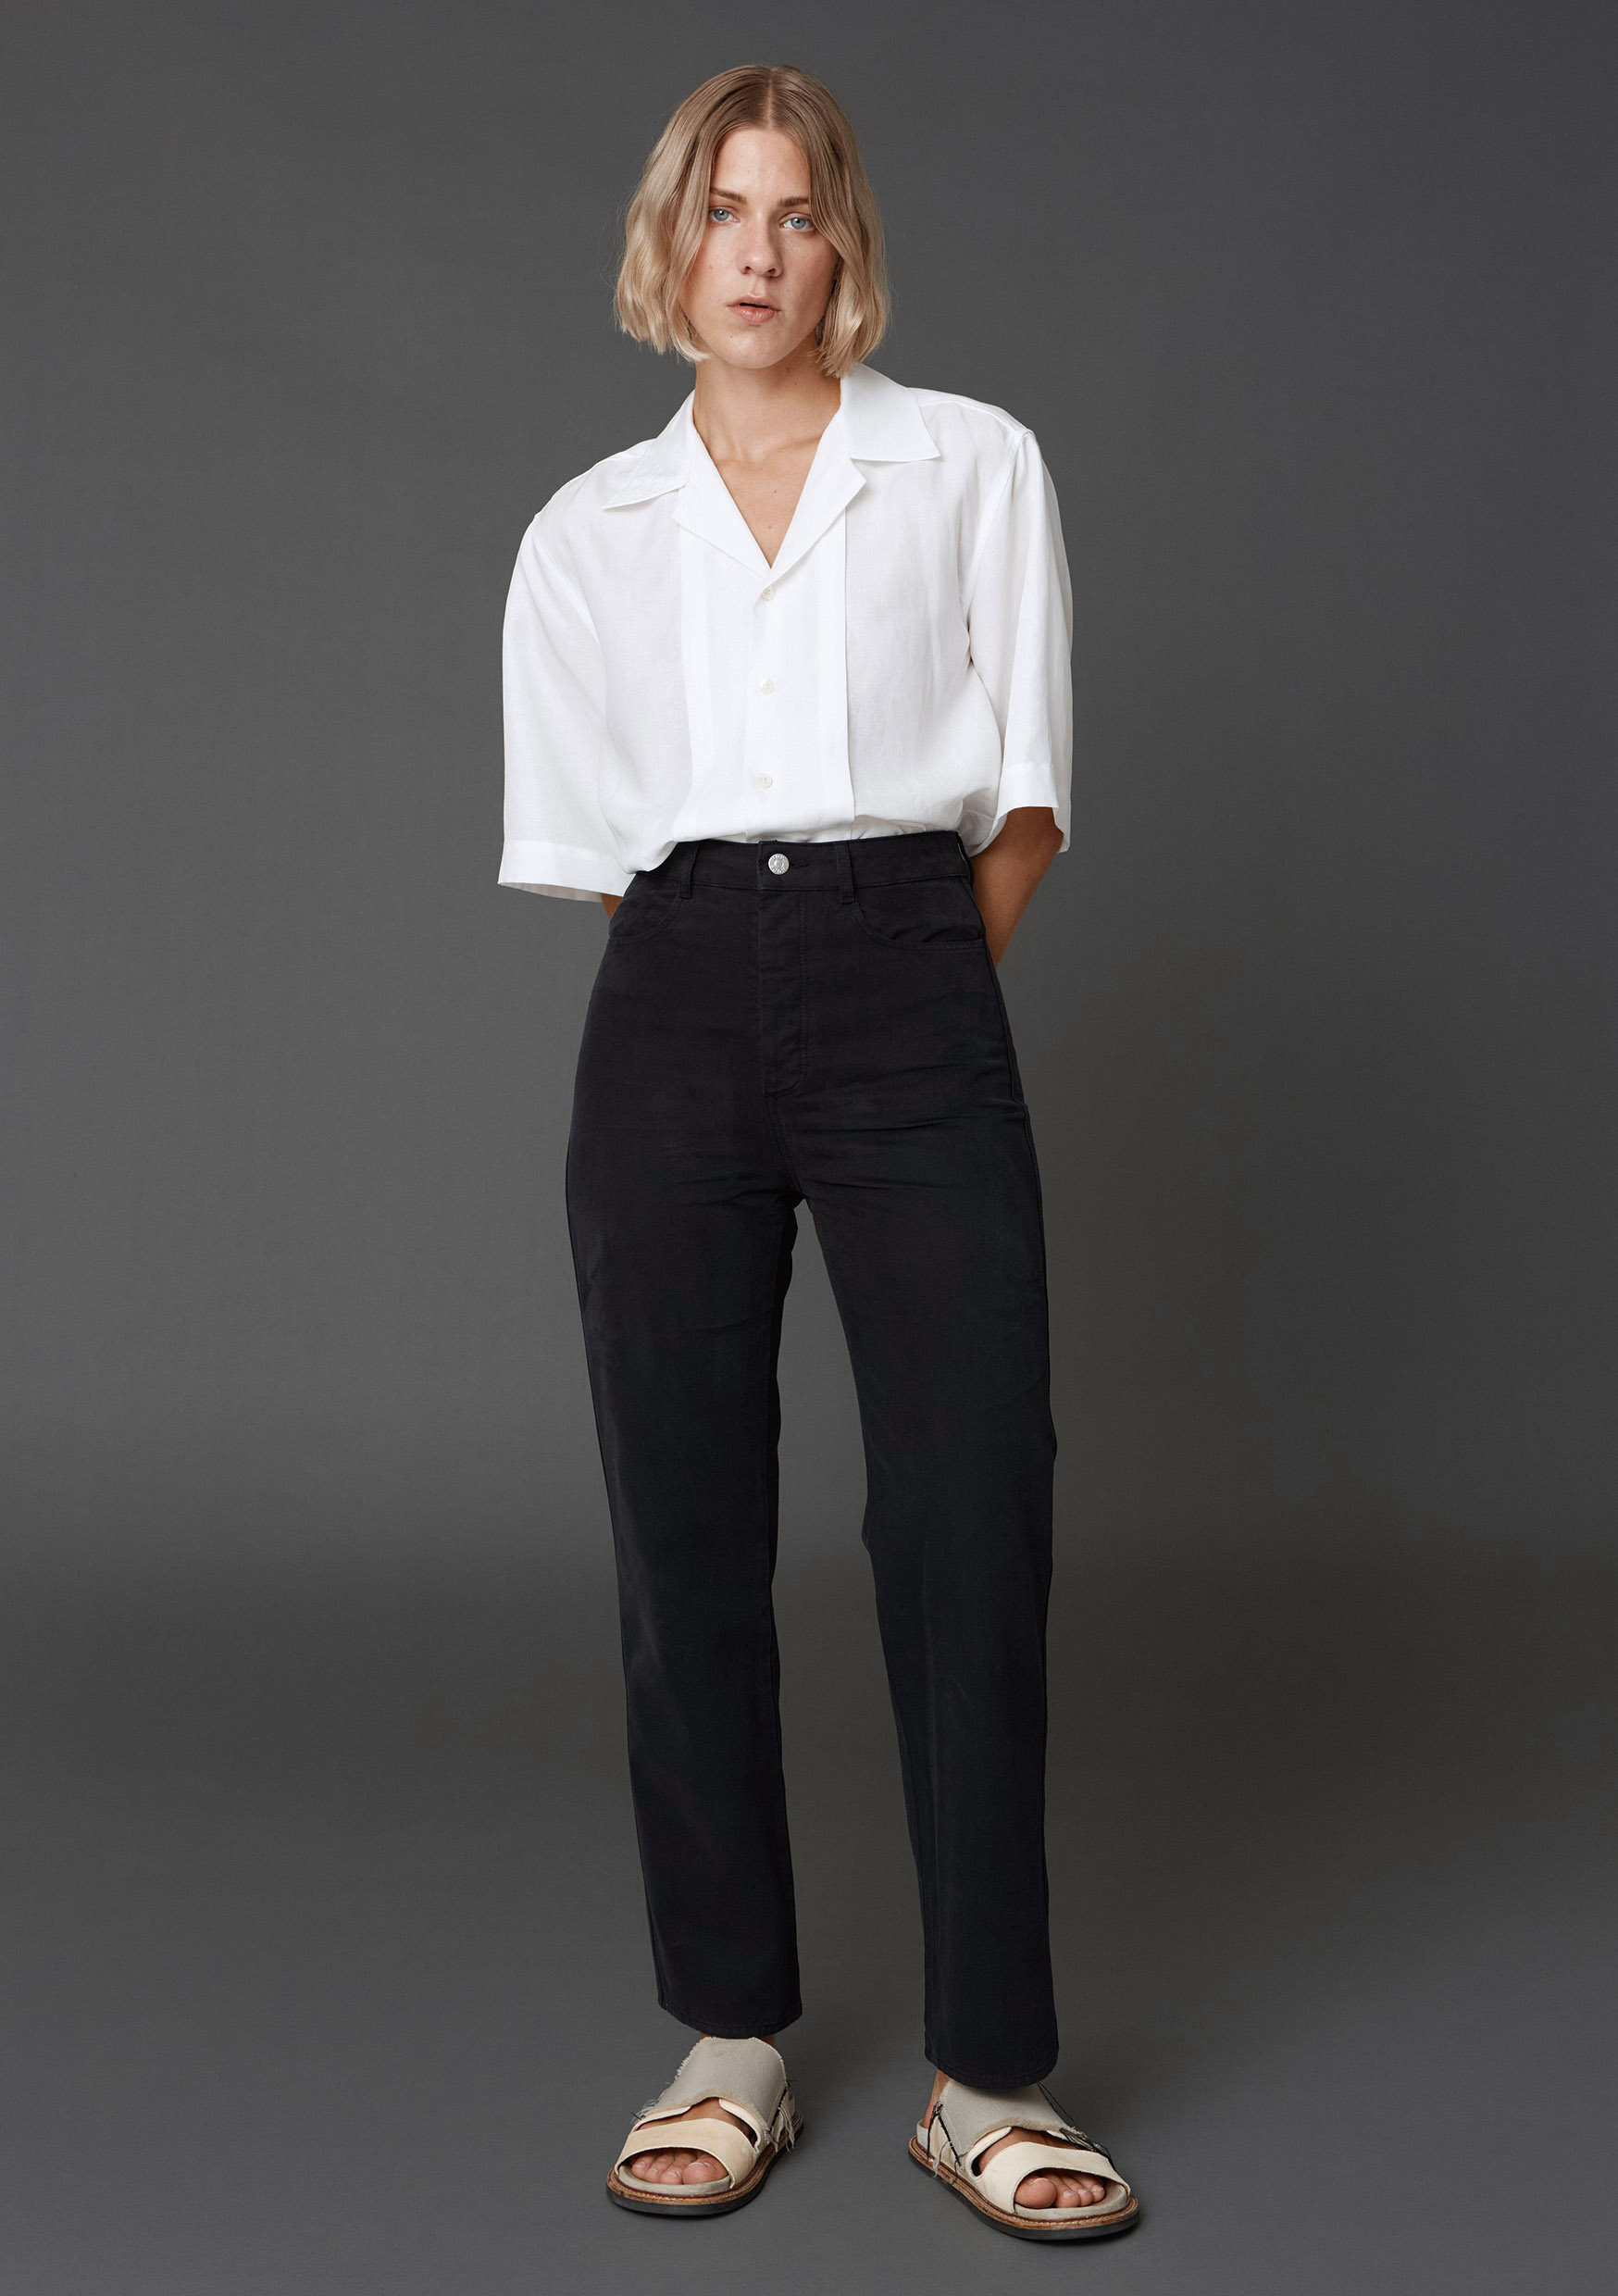 HOPE_SS21_14204822_stock_trousers_black_0022